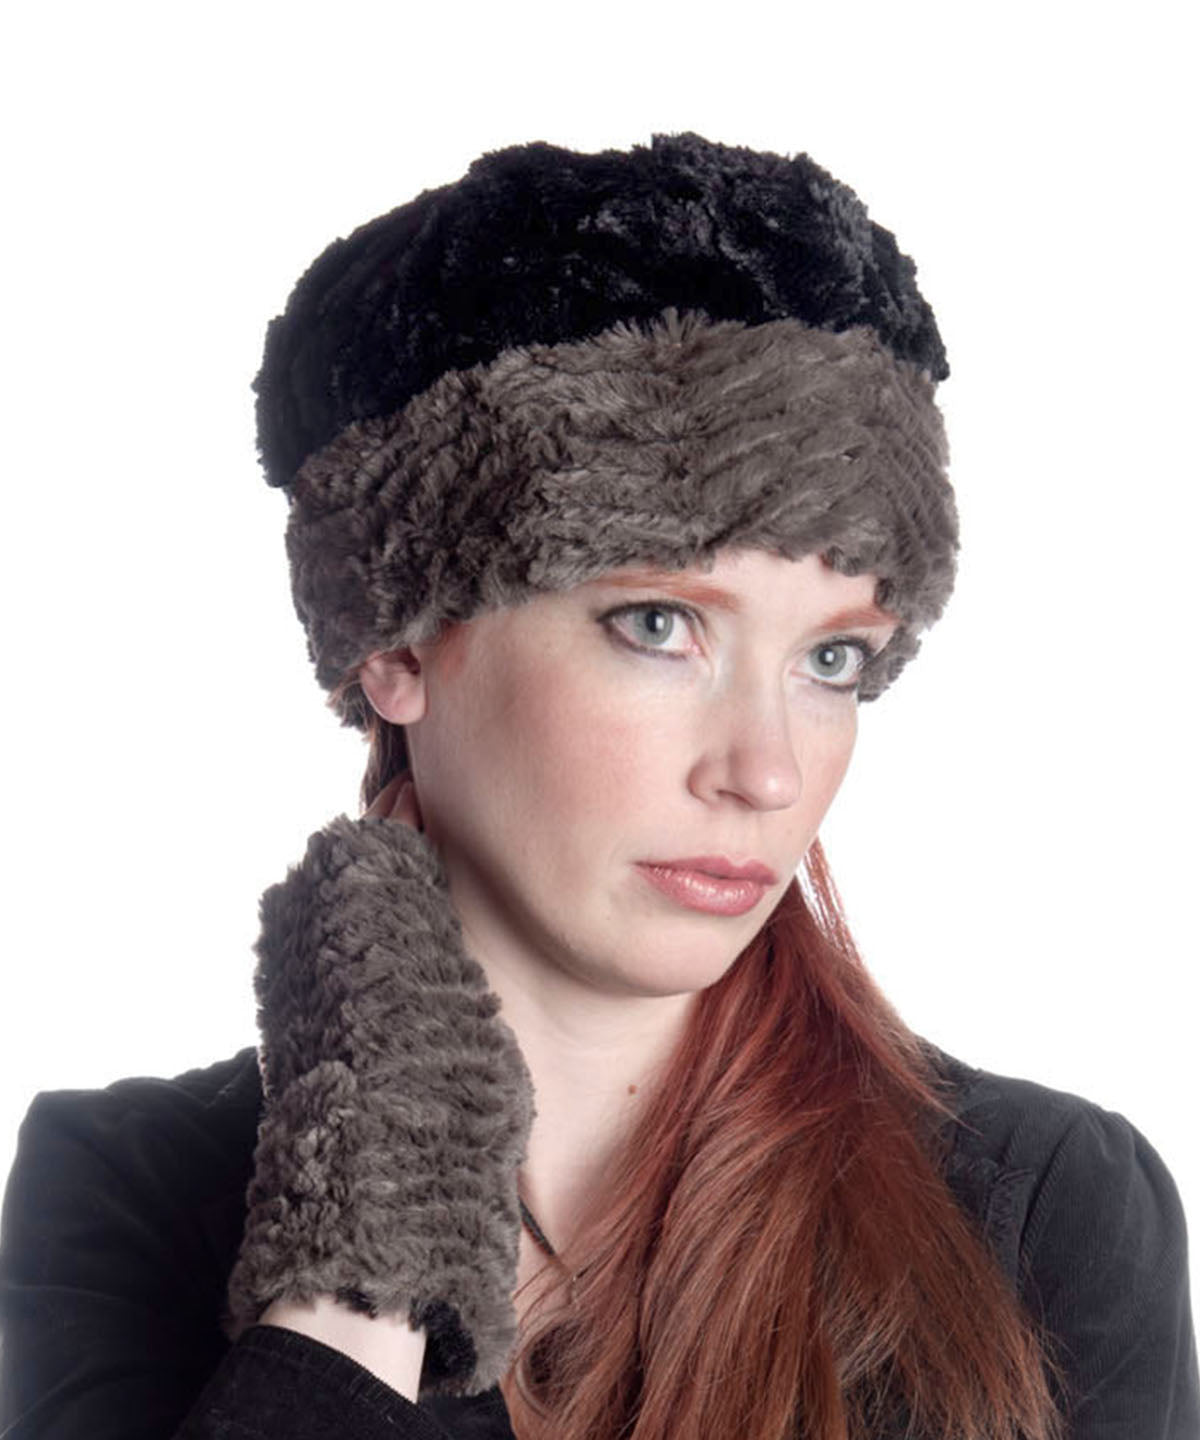 Woman modeling Beanie Hat shown reversed in Gray Chevron and Cuddly Black Faux Fur. Handmade by Pandemonium Millinery in Seattle, WA.